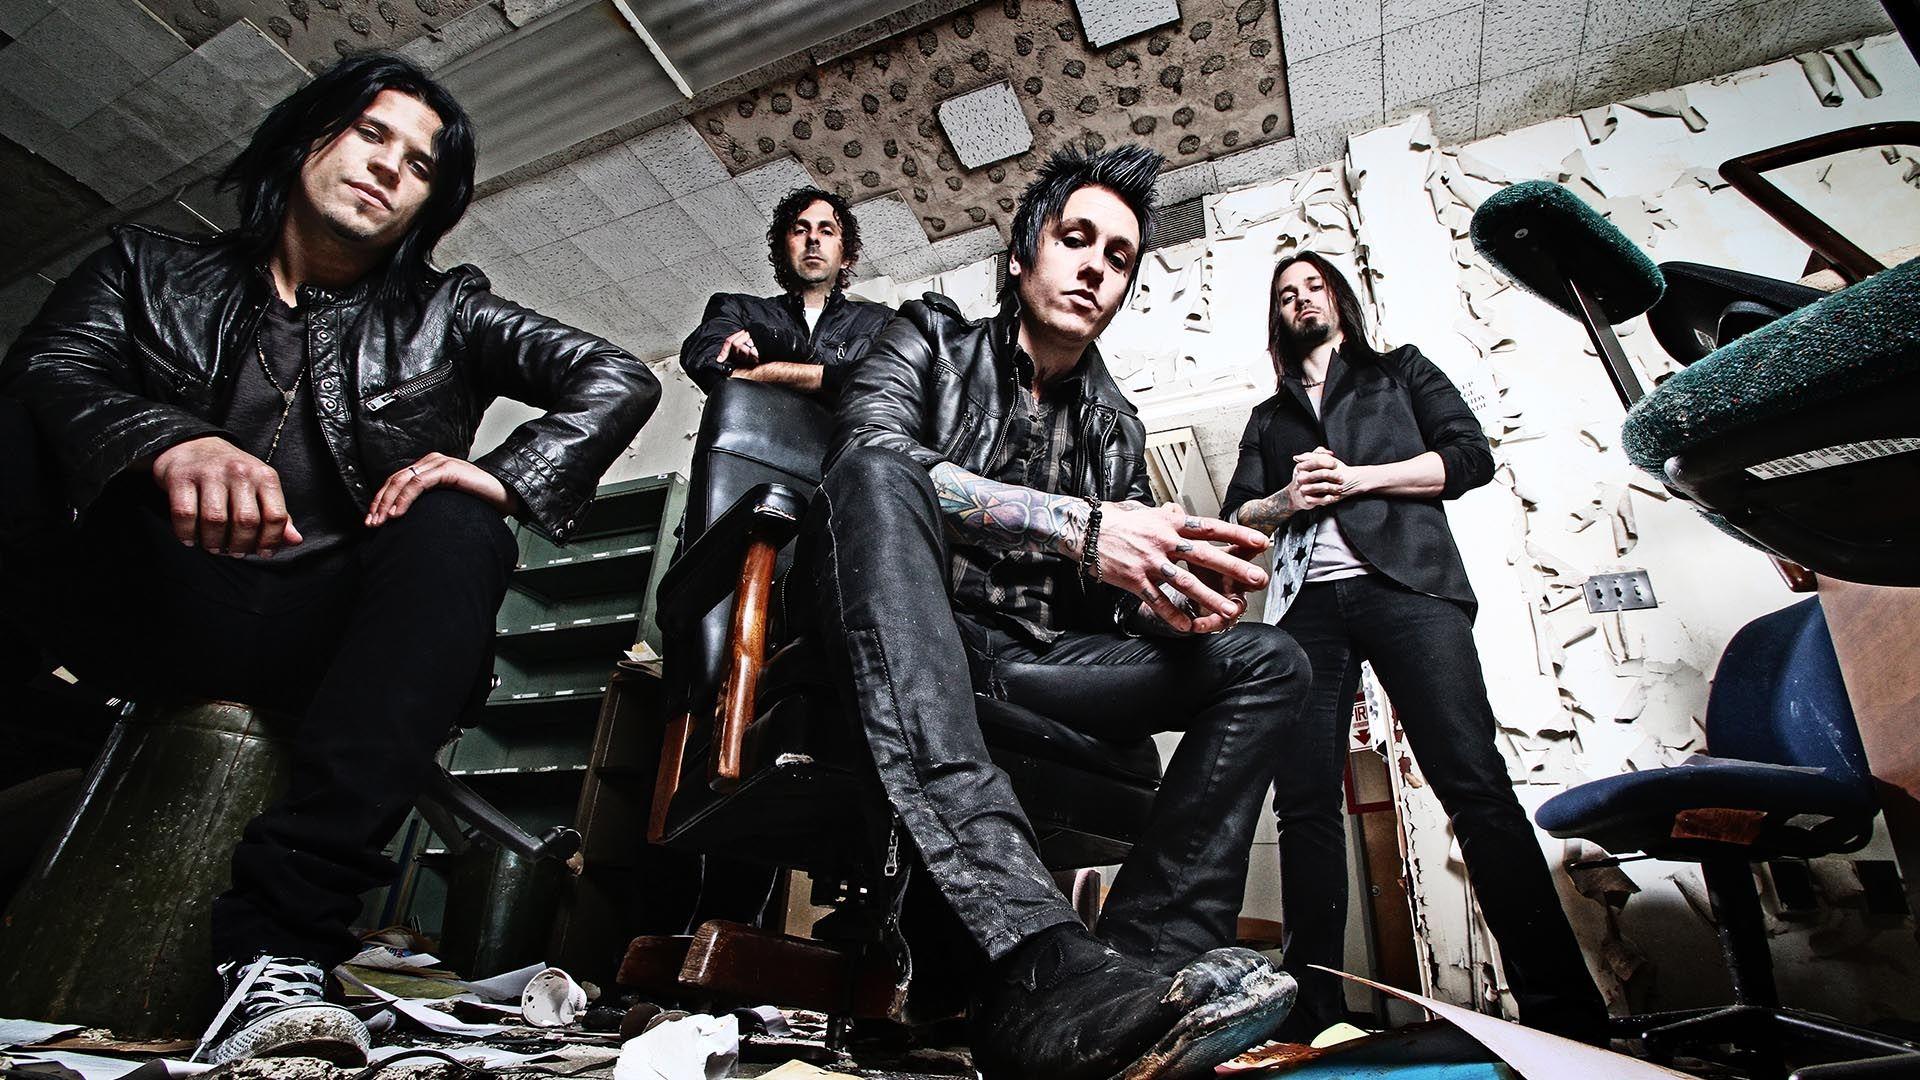 Download Wallpaper 1920x1080 papa roach, graphics, band, armchairs